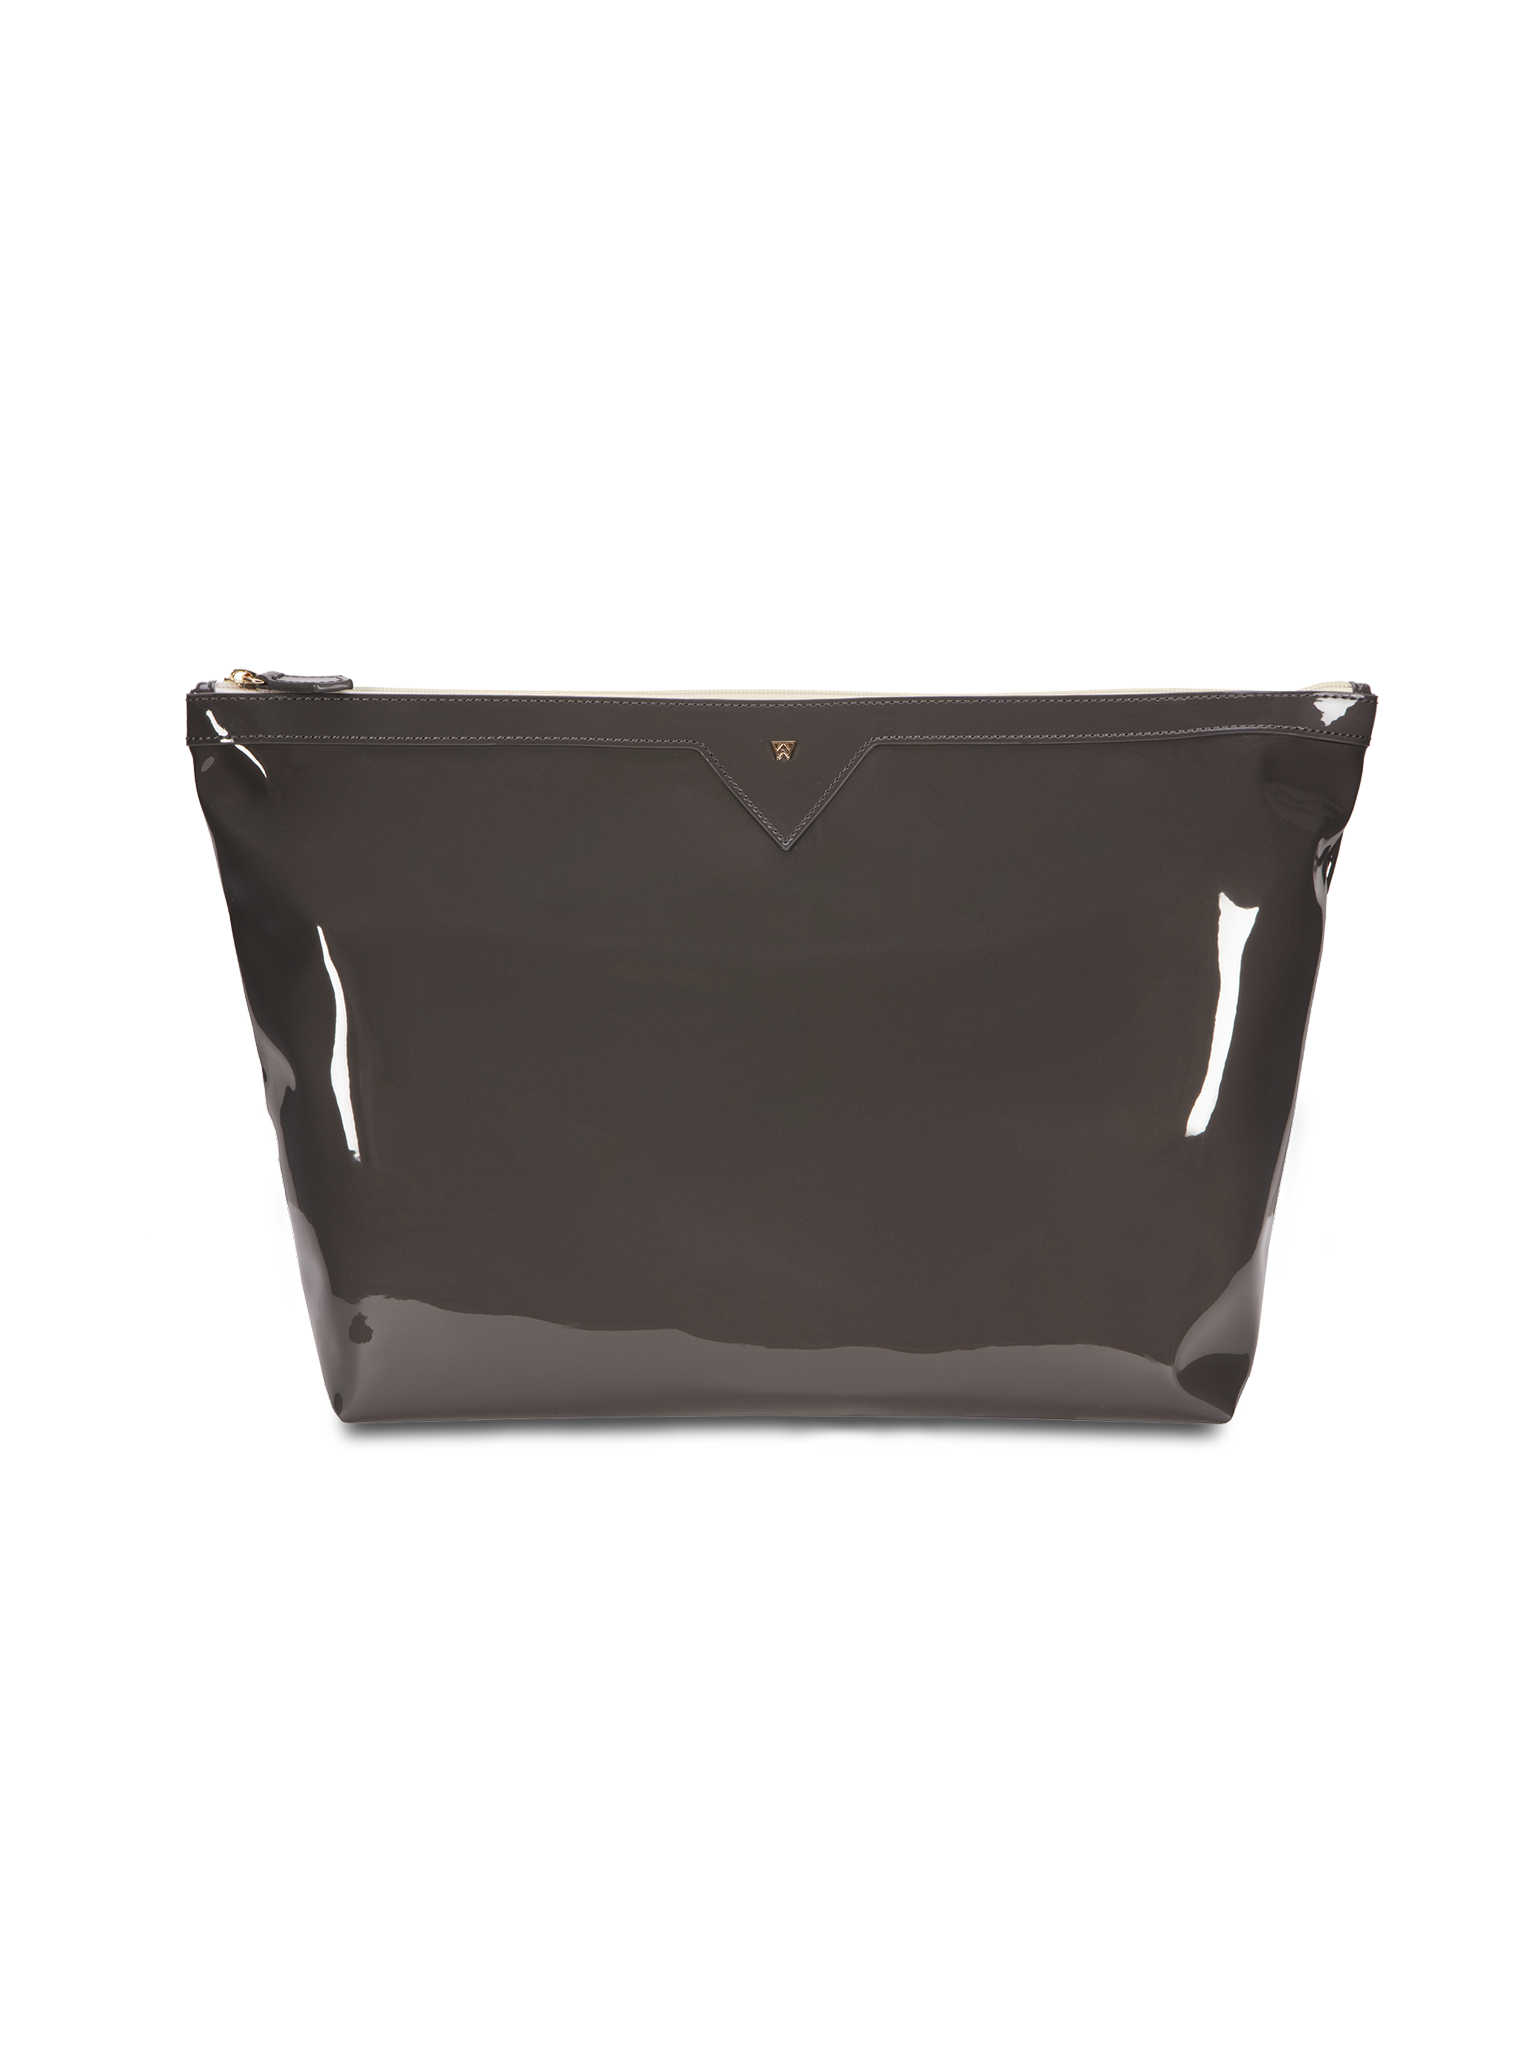 Keep your precious belongings cool and protected with our removable, zipper closed, interior pouch in charcoal black 